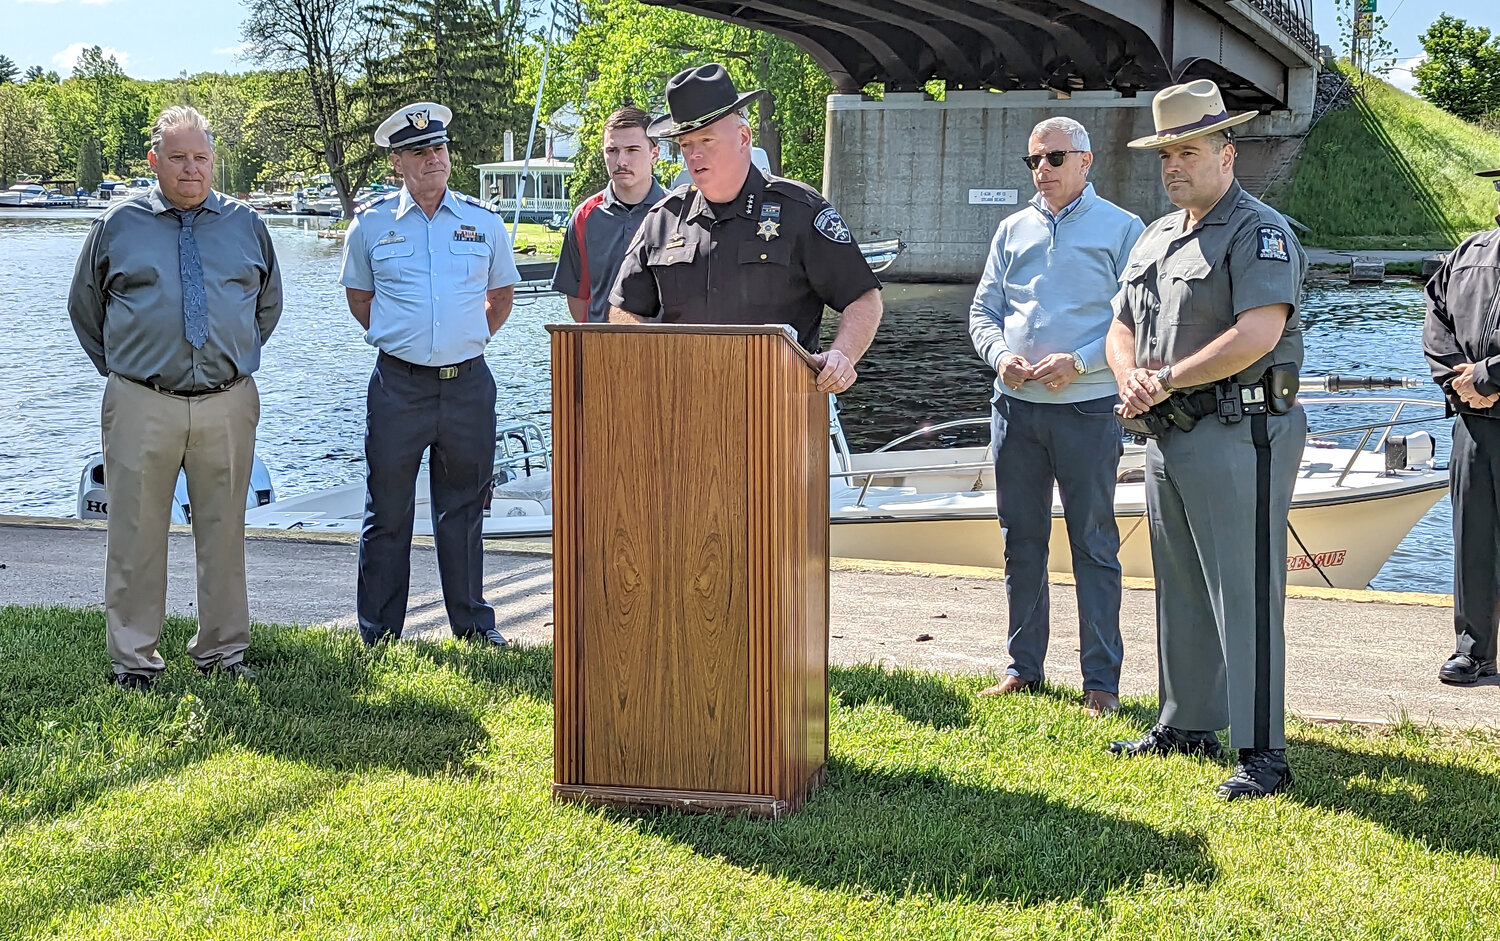 Oneida County Sheriff Robert M. Maciol discusses boater safety with other county leaders alongside the Barge Canal in Sylvan Beach Thursday morning. From left: Sylvan Beach Mayor Richard Sullivan, U.S. Coast Guard Auxiliary Flotilla Commander John P. Conroy, Sylvan Beach Fire Lt. Colin Isom, Maciol, Oneida County Executive Anthony J. Picente, and New York State Police Lt. Francis LaBarbera.